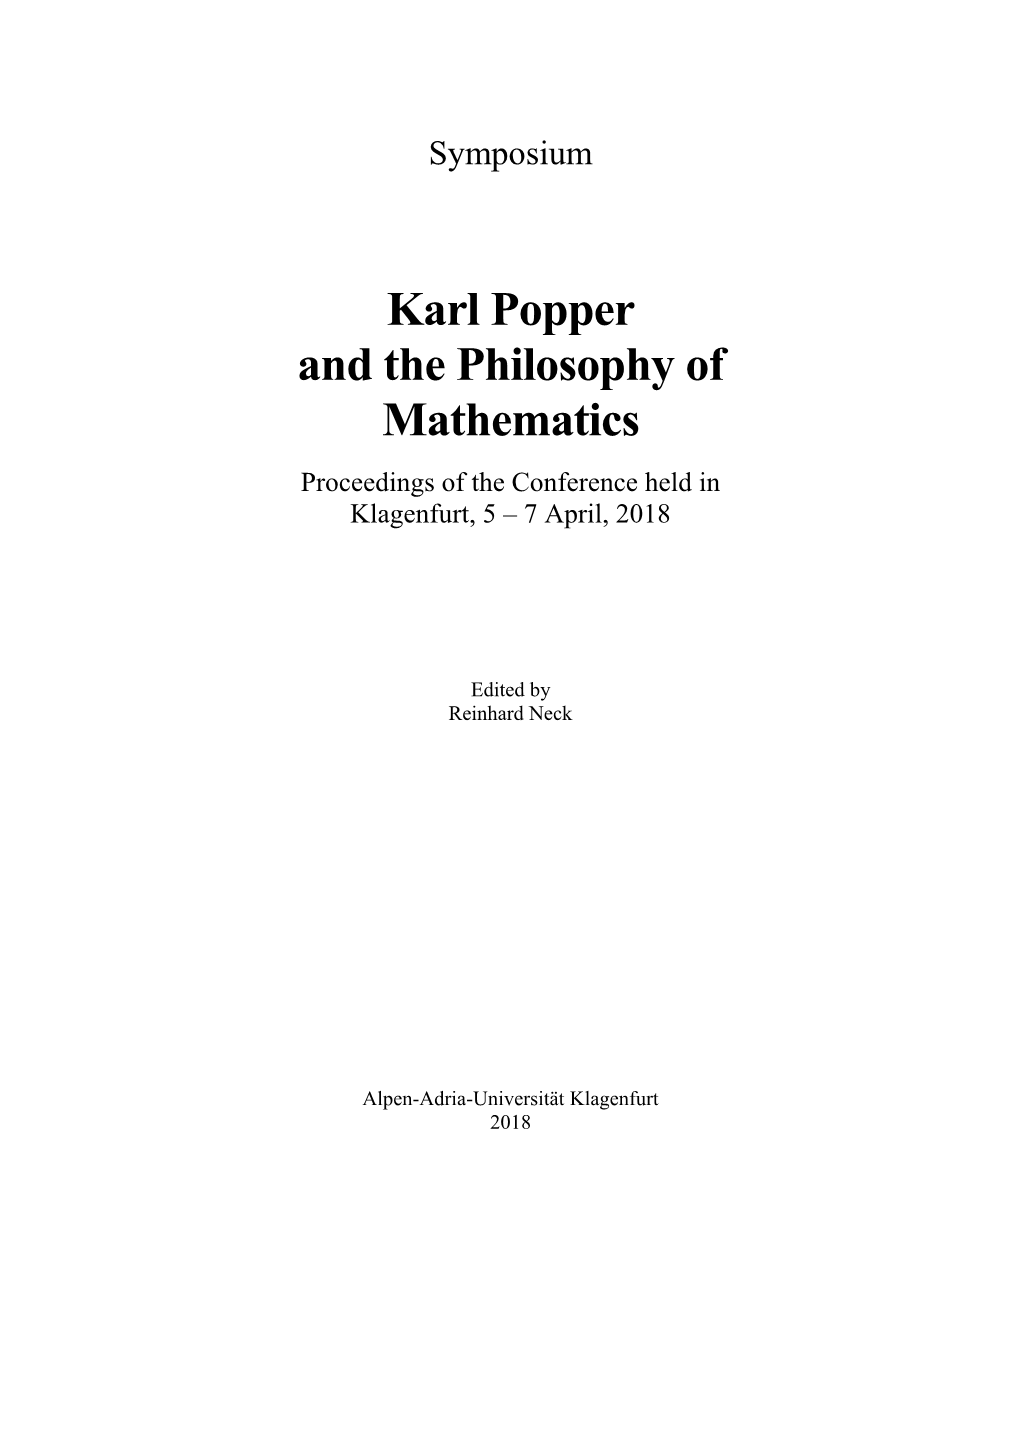 Karl Popper and the Philosophy of Mathematics Proceedings of the Conference Held in Klagenfurt, 5 – 7 April, 2018